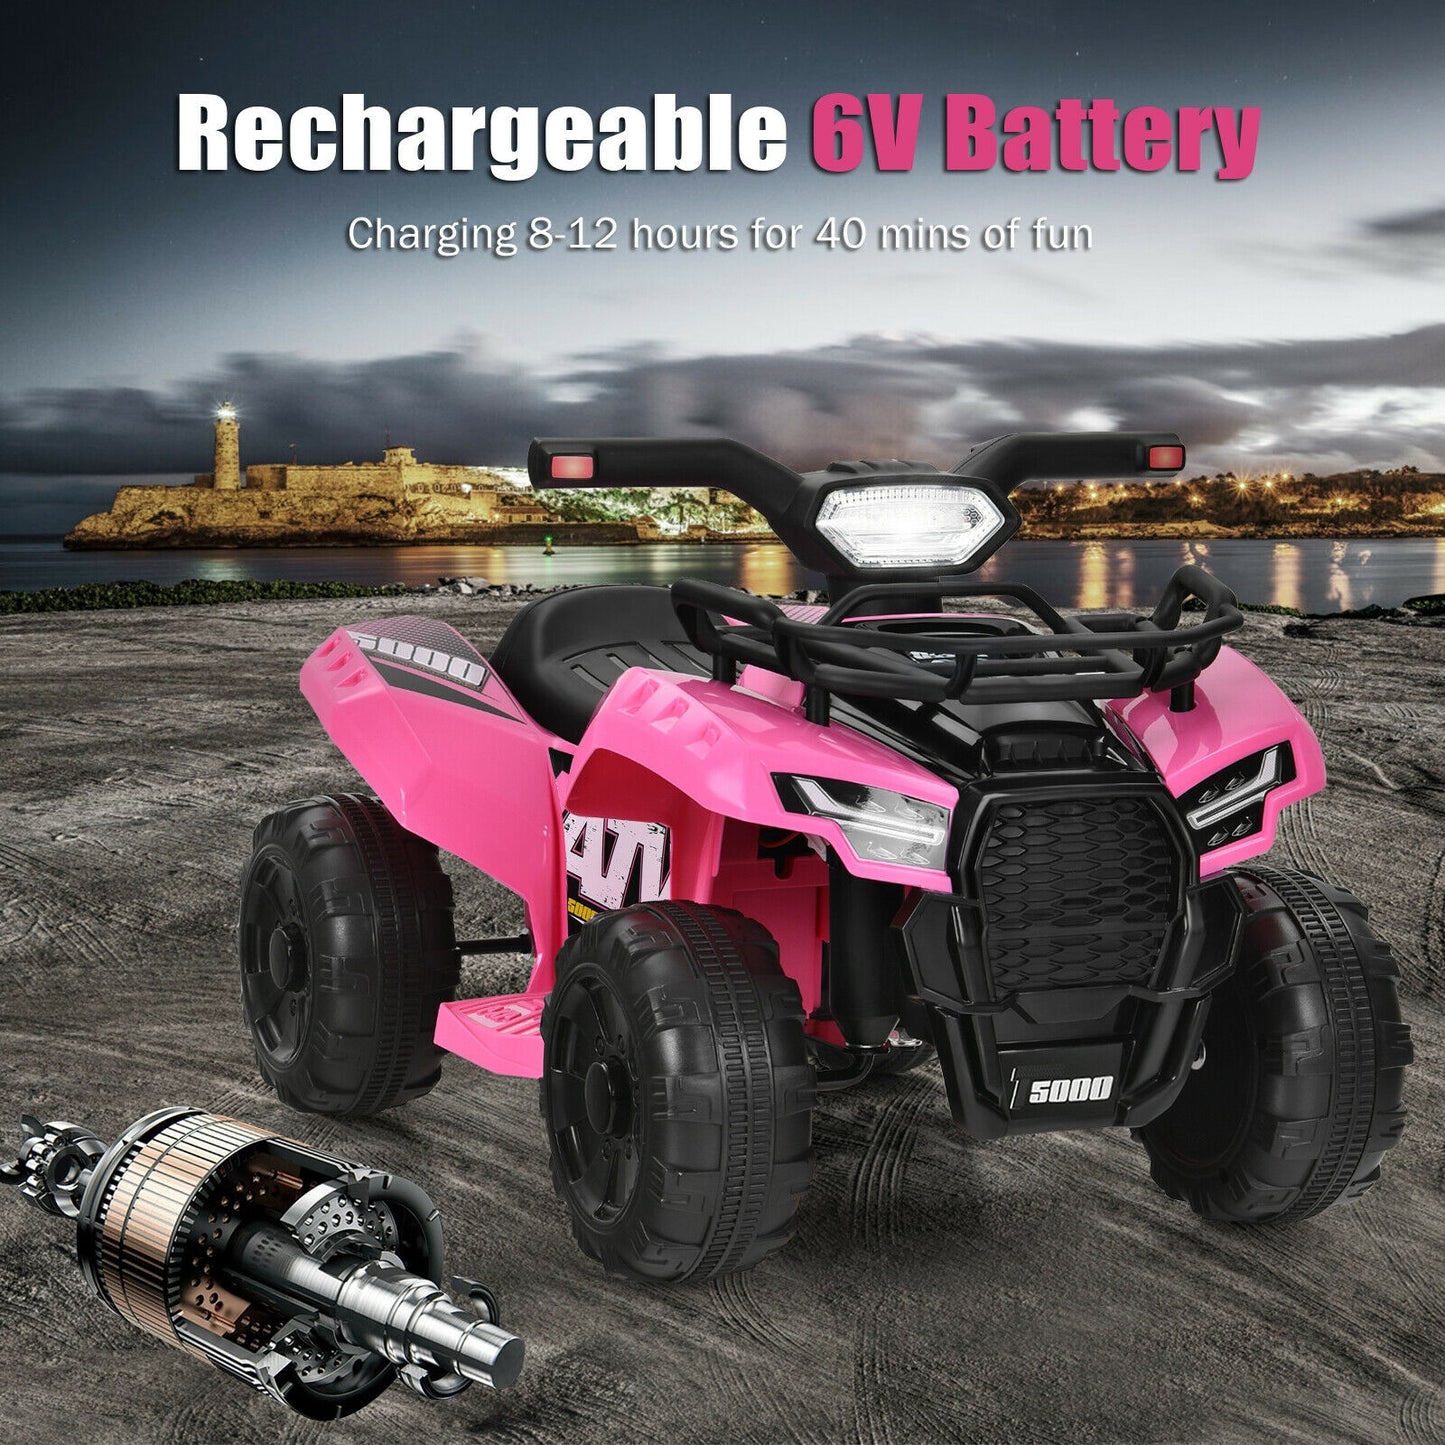 6V Kids ATV Quad Electric Ride On Car with LED Light and MP3-Pink